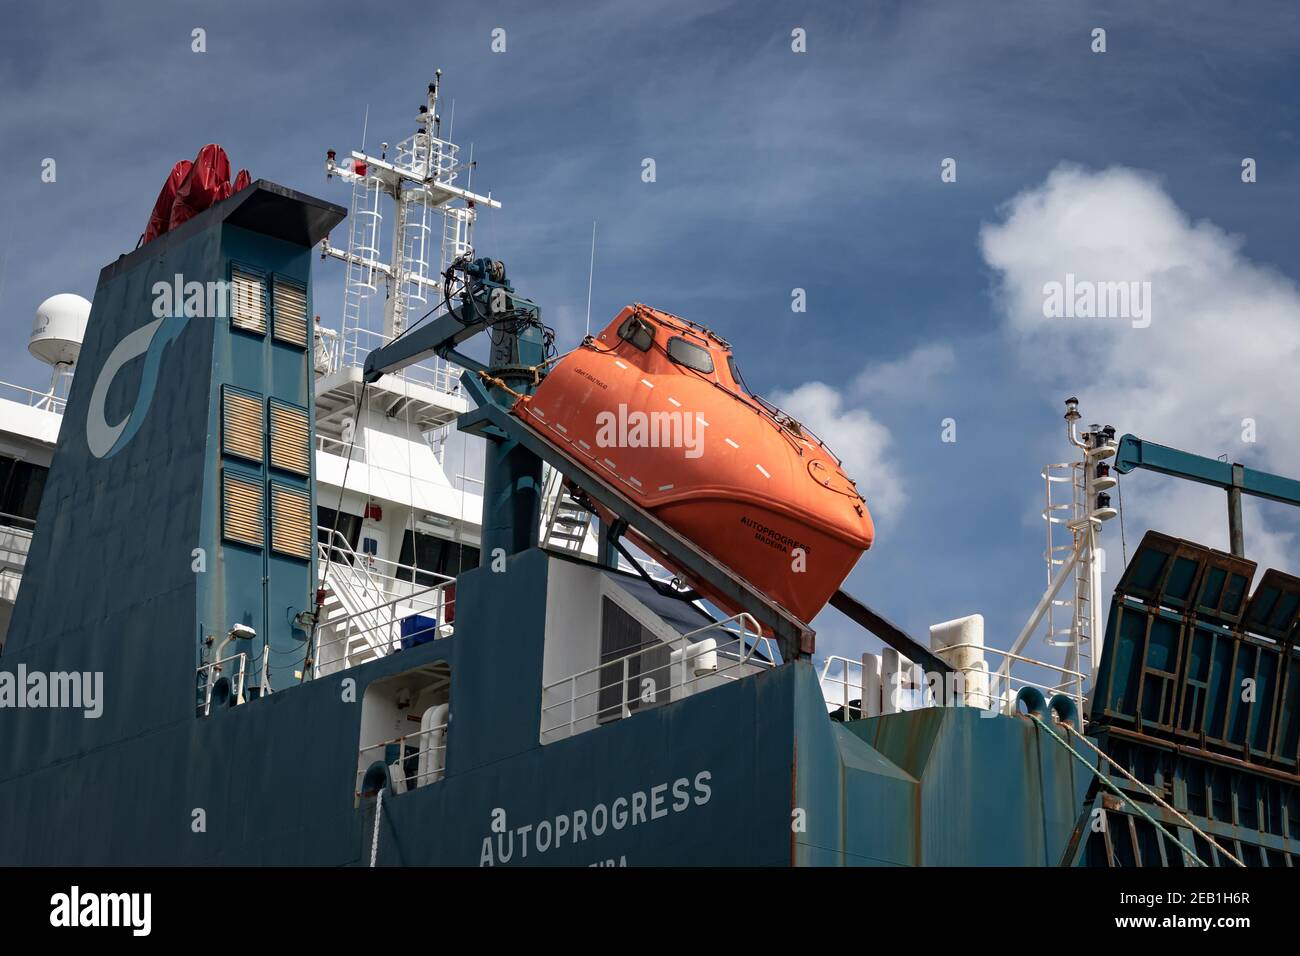 Orange Self Righting Lifeboat Aboard the 'AUTOPROGRESS' Vehicle Carrier Ship Moored at Falmouth Cornwall England Stock Photo